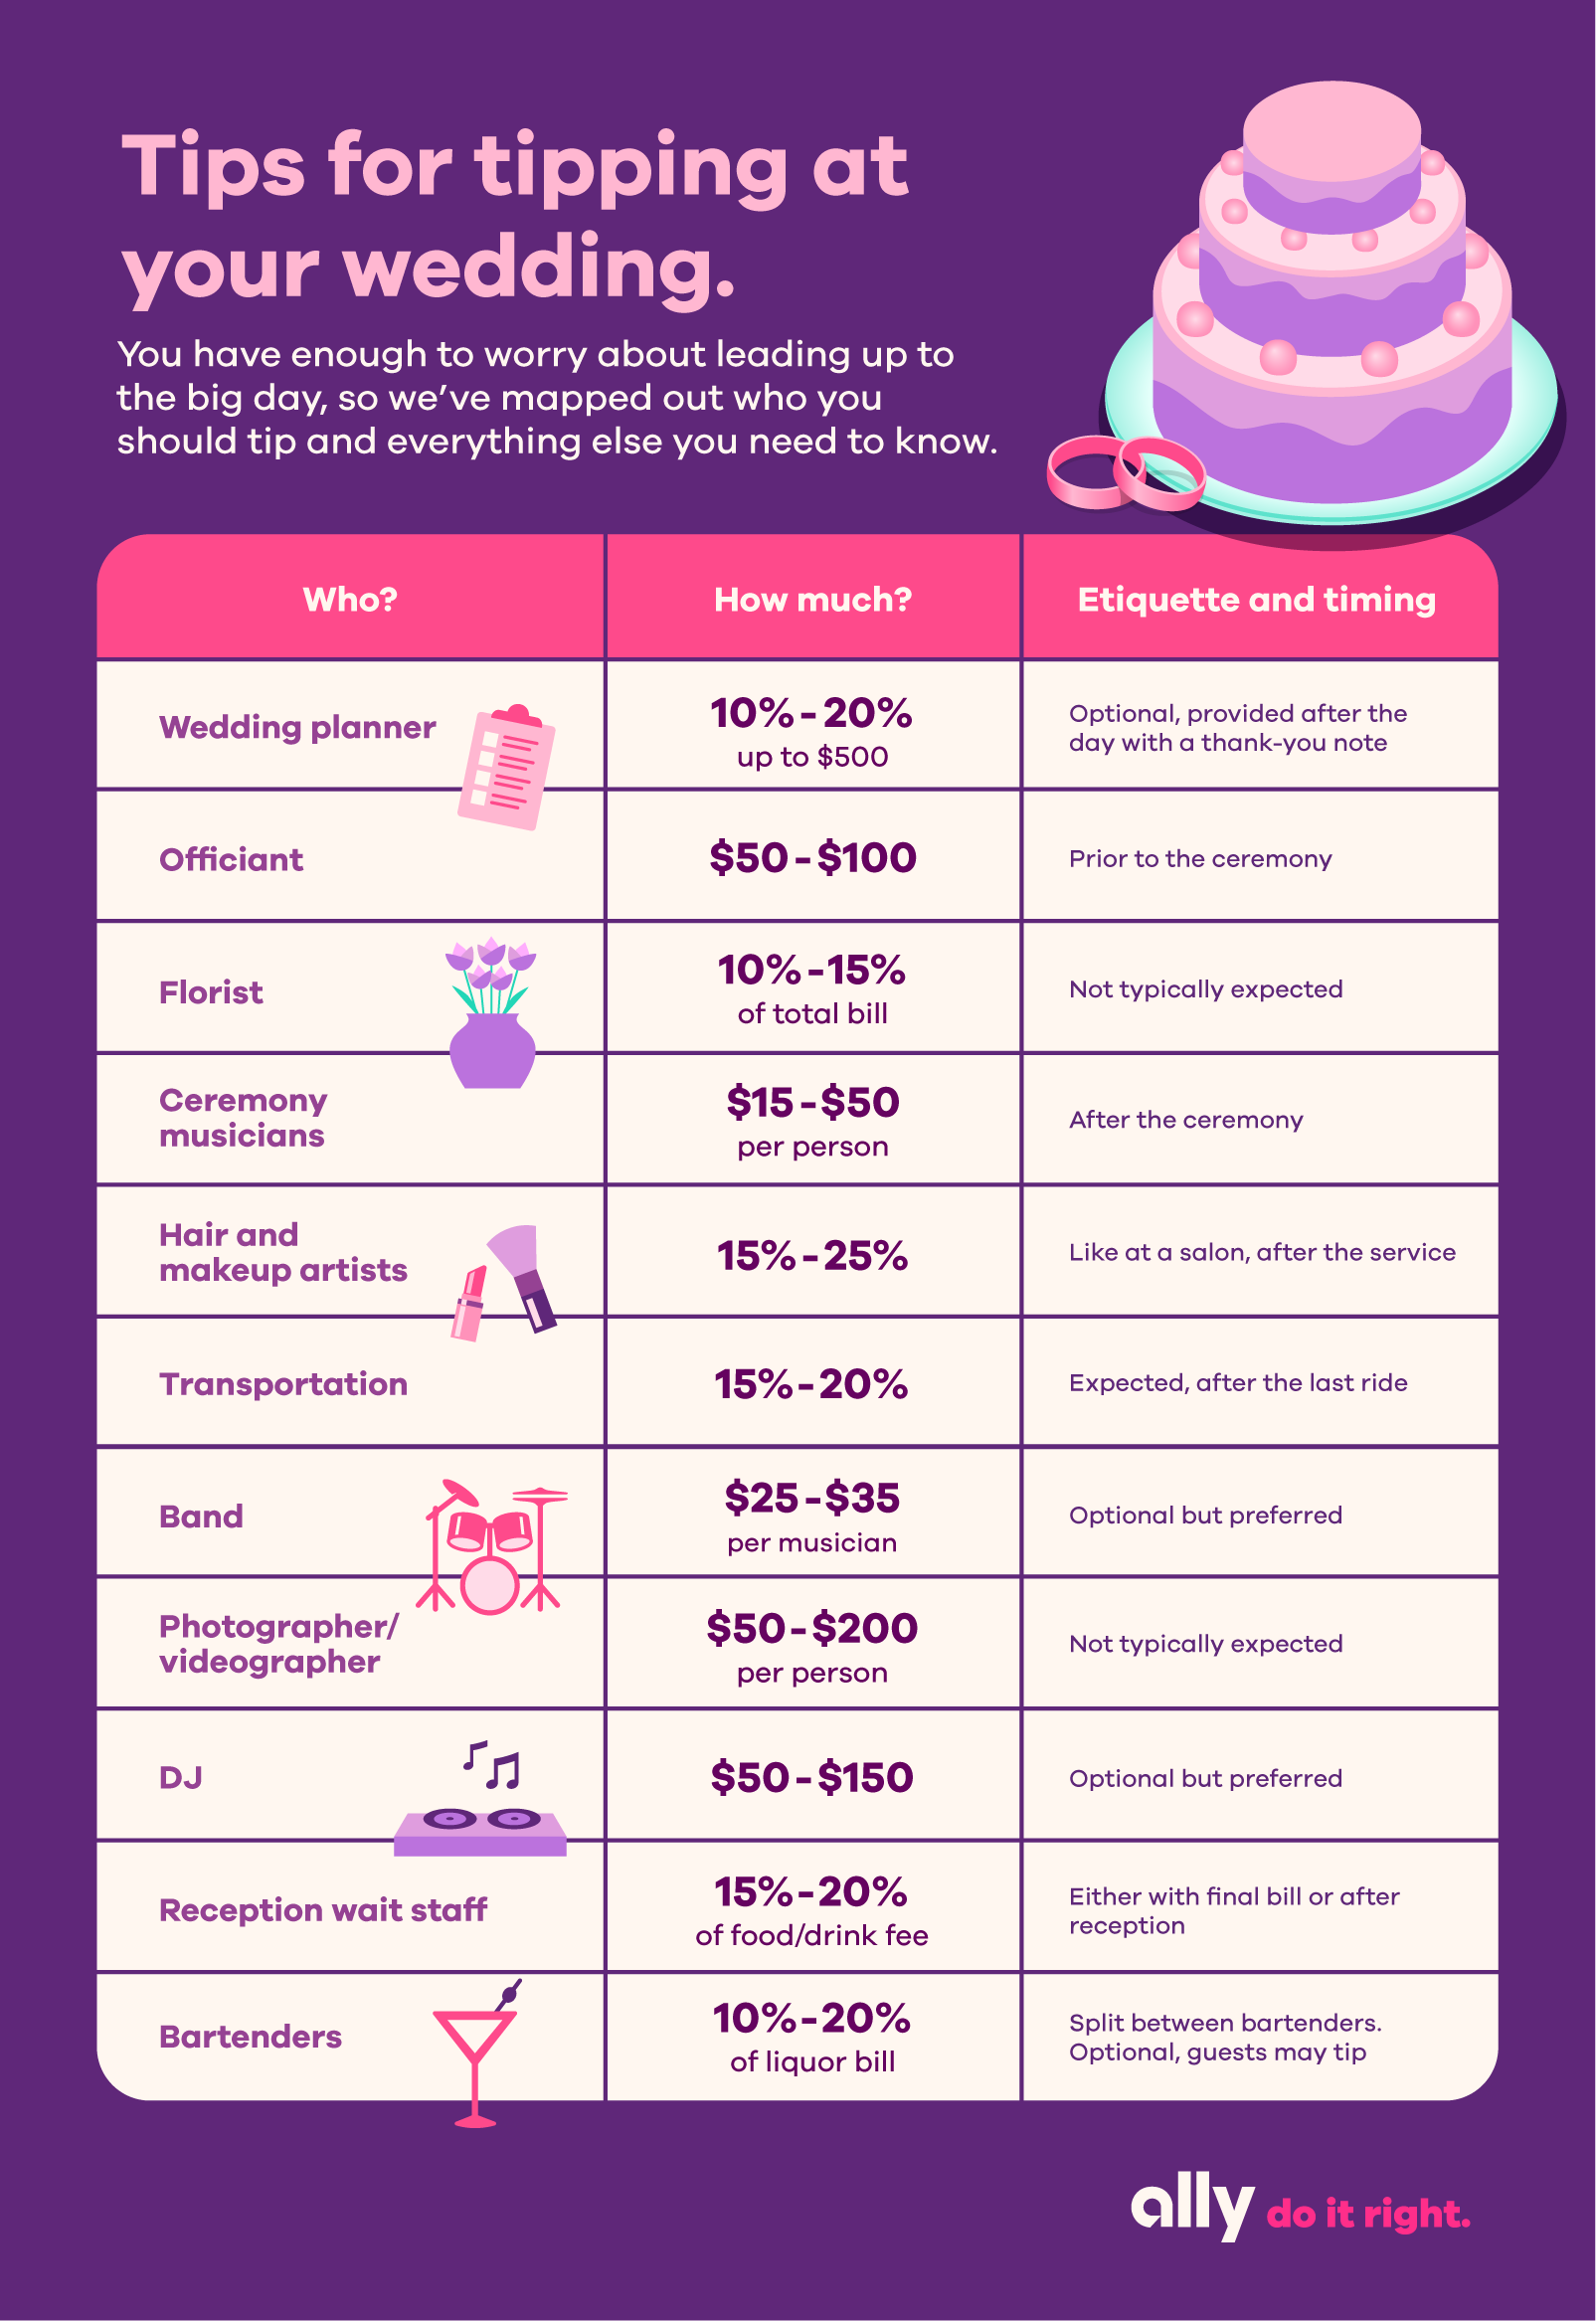 Tips for tipping at your wedding. You have enough to worry about leading up to the big day, so we’ve mapped out who you should tip and everything else you need to know. Who? How much? Etiquette and timing. Wedding planner: 10% to 20% up to $500; Optional, provided after the big day with a thank-you note. Officiant: $50 to $100; Prior to the ceremony. Florist: 10% to 15% of total bill; Not typically expected. Ceremony musicians: $15 to $50 per person. After the ceremony. Hair and makeup artists: 15% to 25%; Like at a salon, after the service. Transportation: 15% to 20%; Expected, after the last ride. Band: $25 to $35 per musician; Optional but preferred. Photographer/videographer: $50 to $200 per person; Not typically expected. DJ: $50 to $150; Optional but preferred. Reception wait staff: 15% to 20% of food/drink fee; Either with final bill or after reception. Bartenders: 10% to 20% of liquor bill; Split between bartenders. Optional, guests may tip.